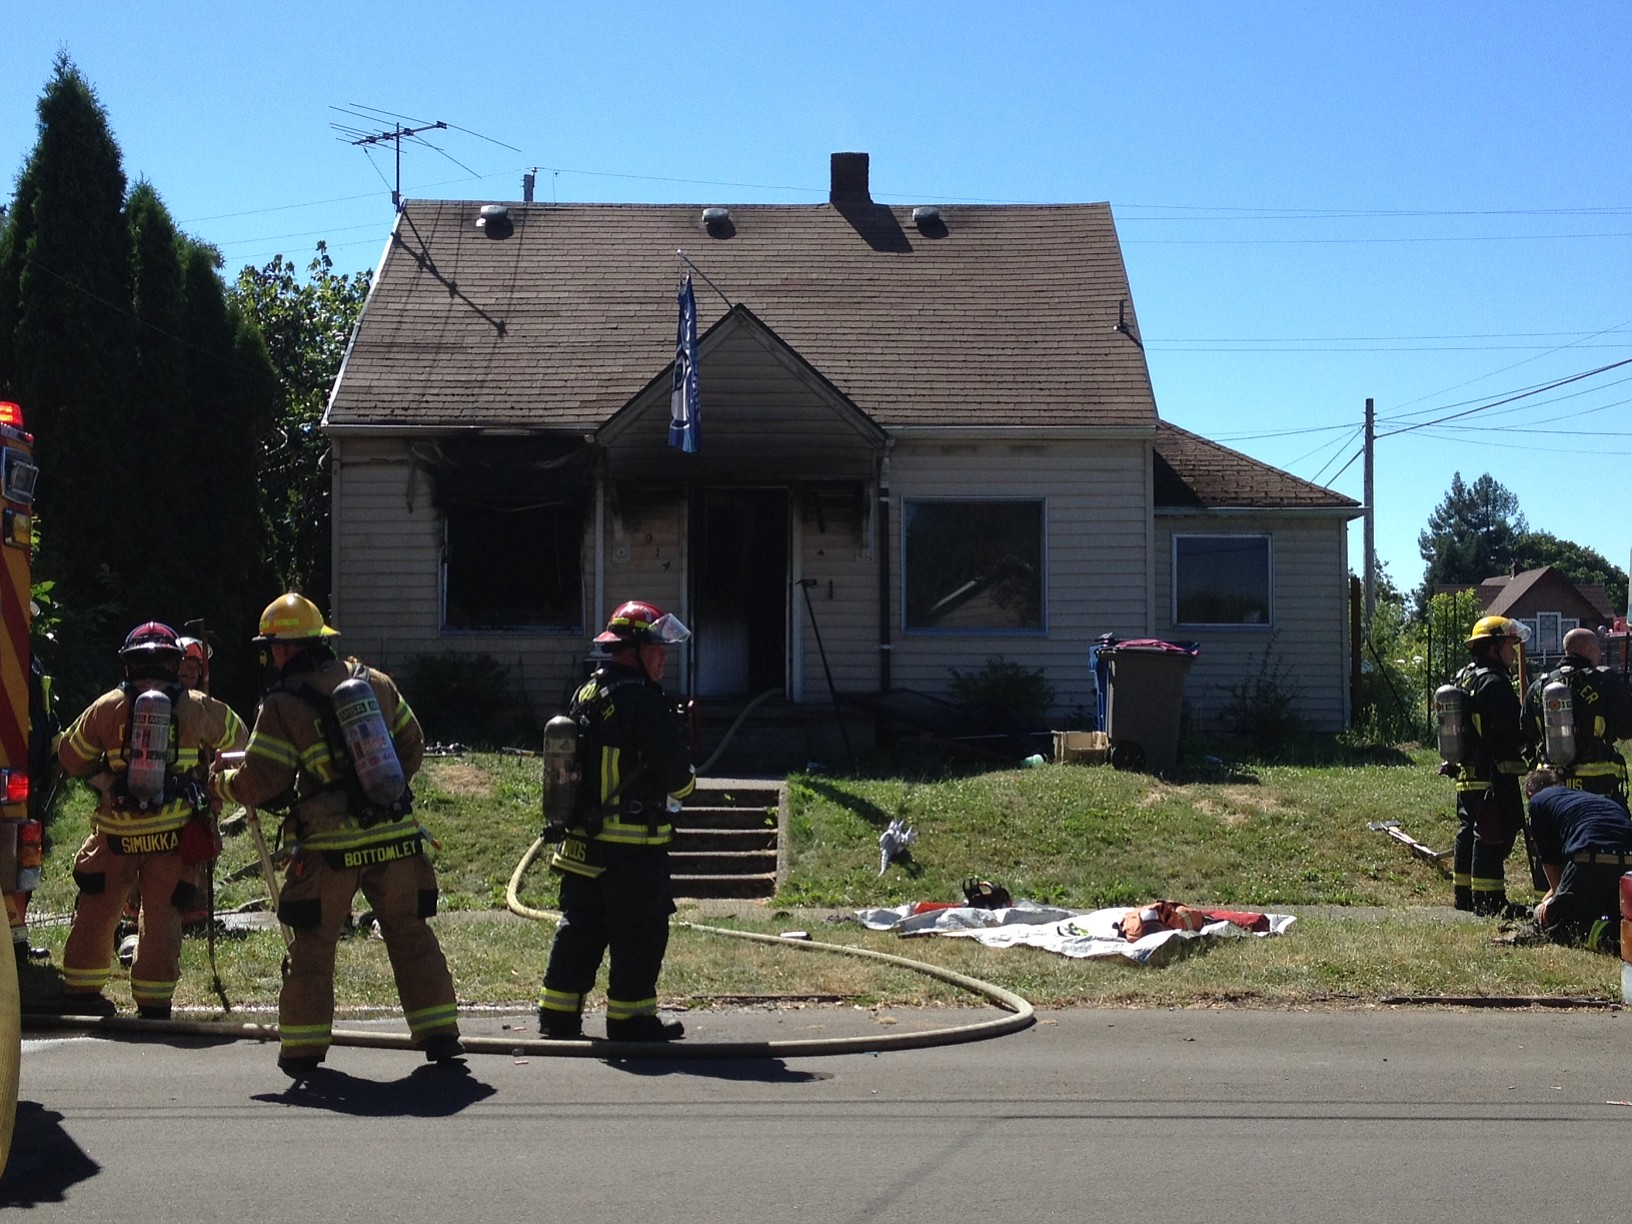 Vancouver firefighters work to mop up a house fire at 30th and N streets this afternoon.